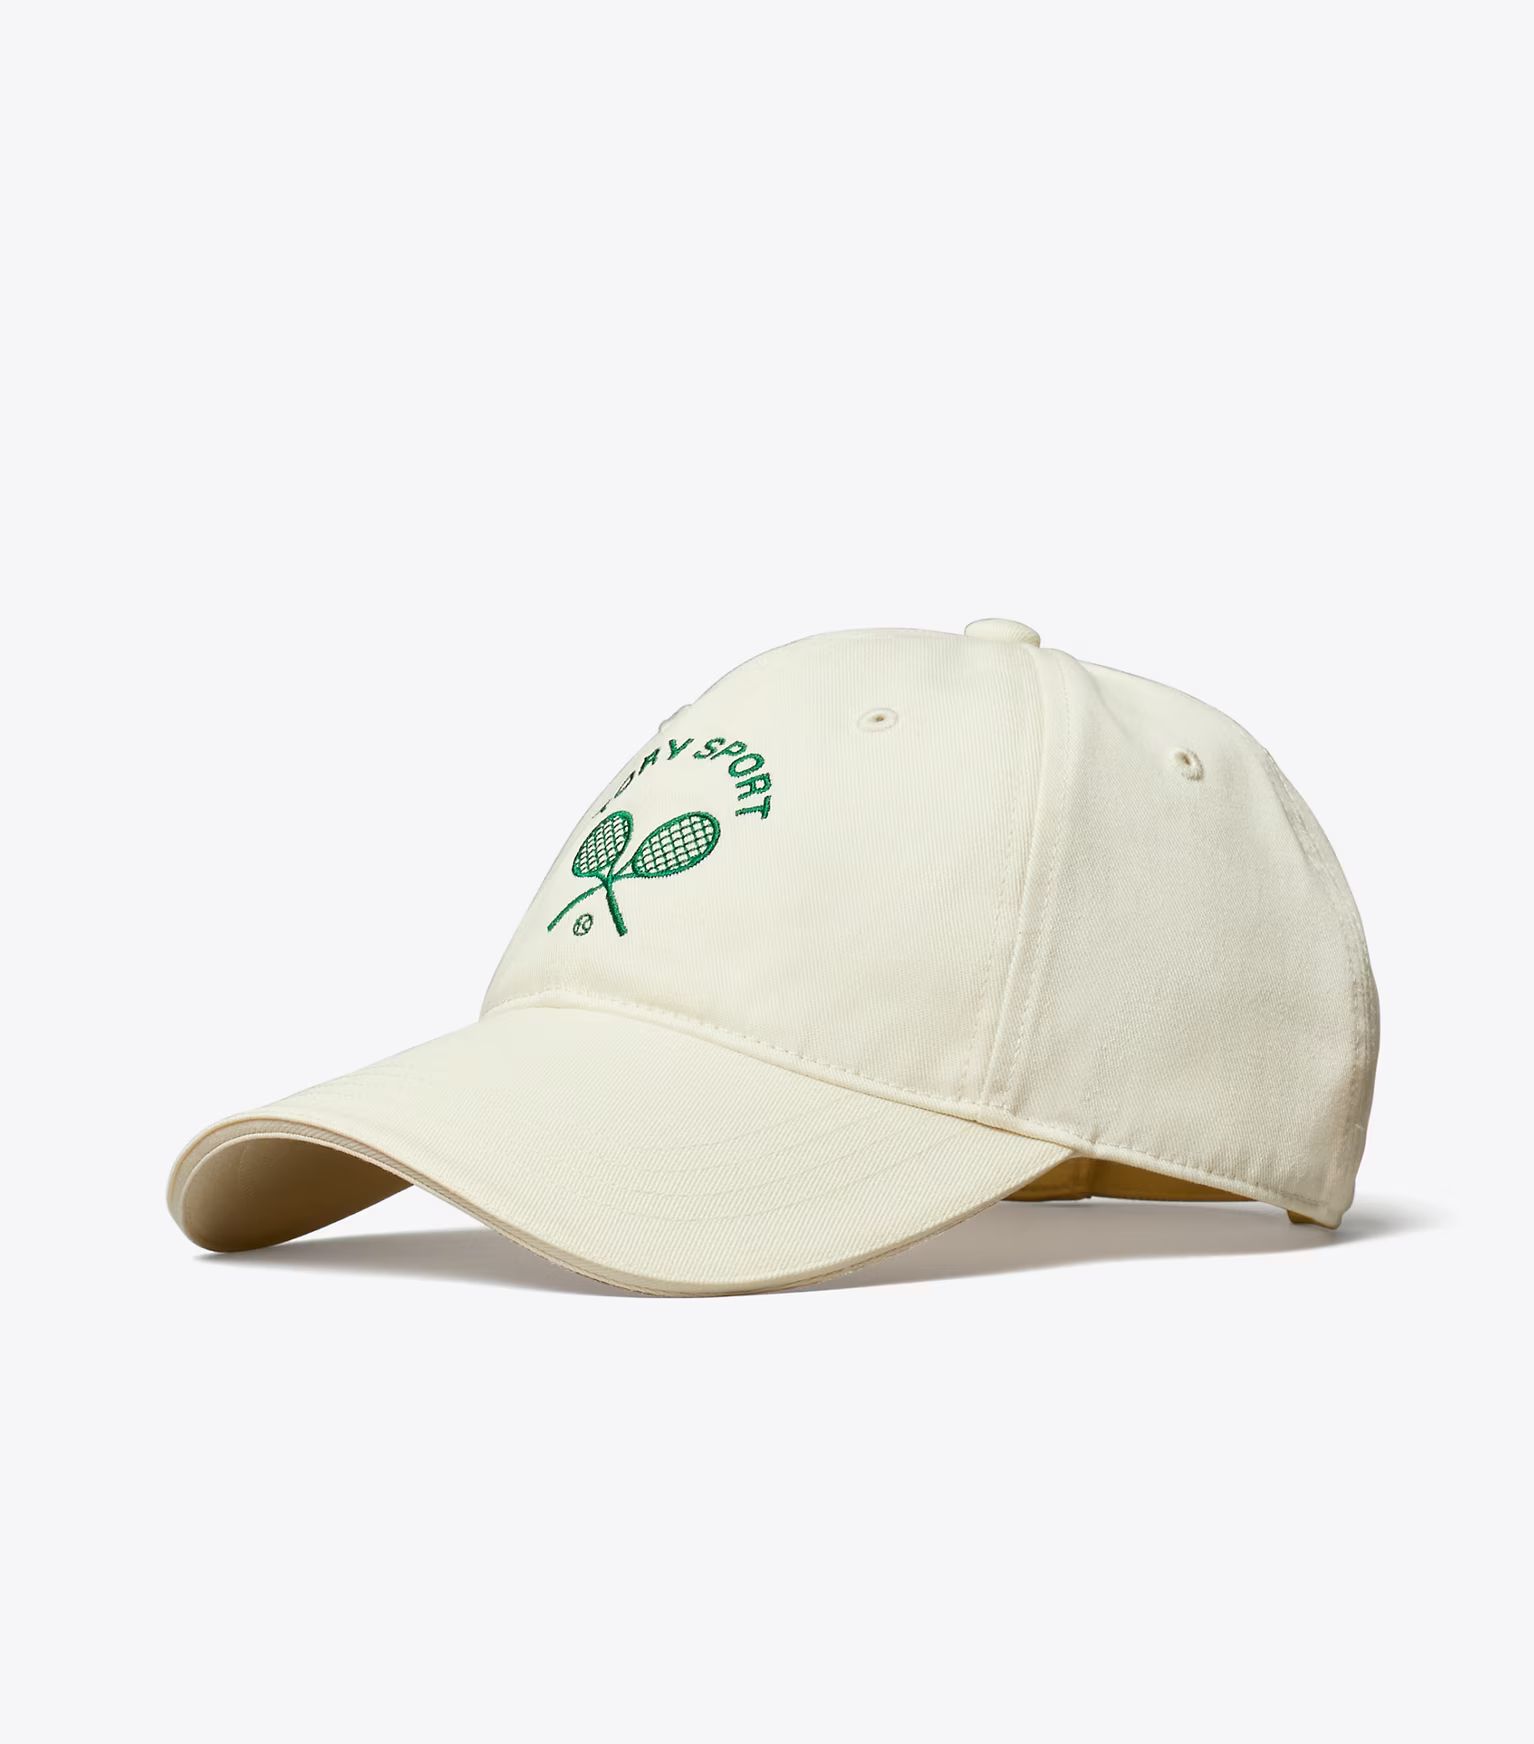 Embroidered Racquets Cap: Women's Designer Hats | Tory Sport | Tory Burch (US)